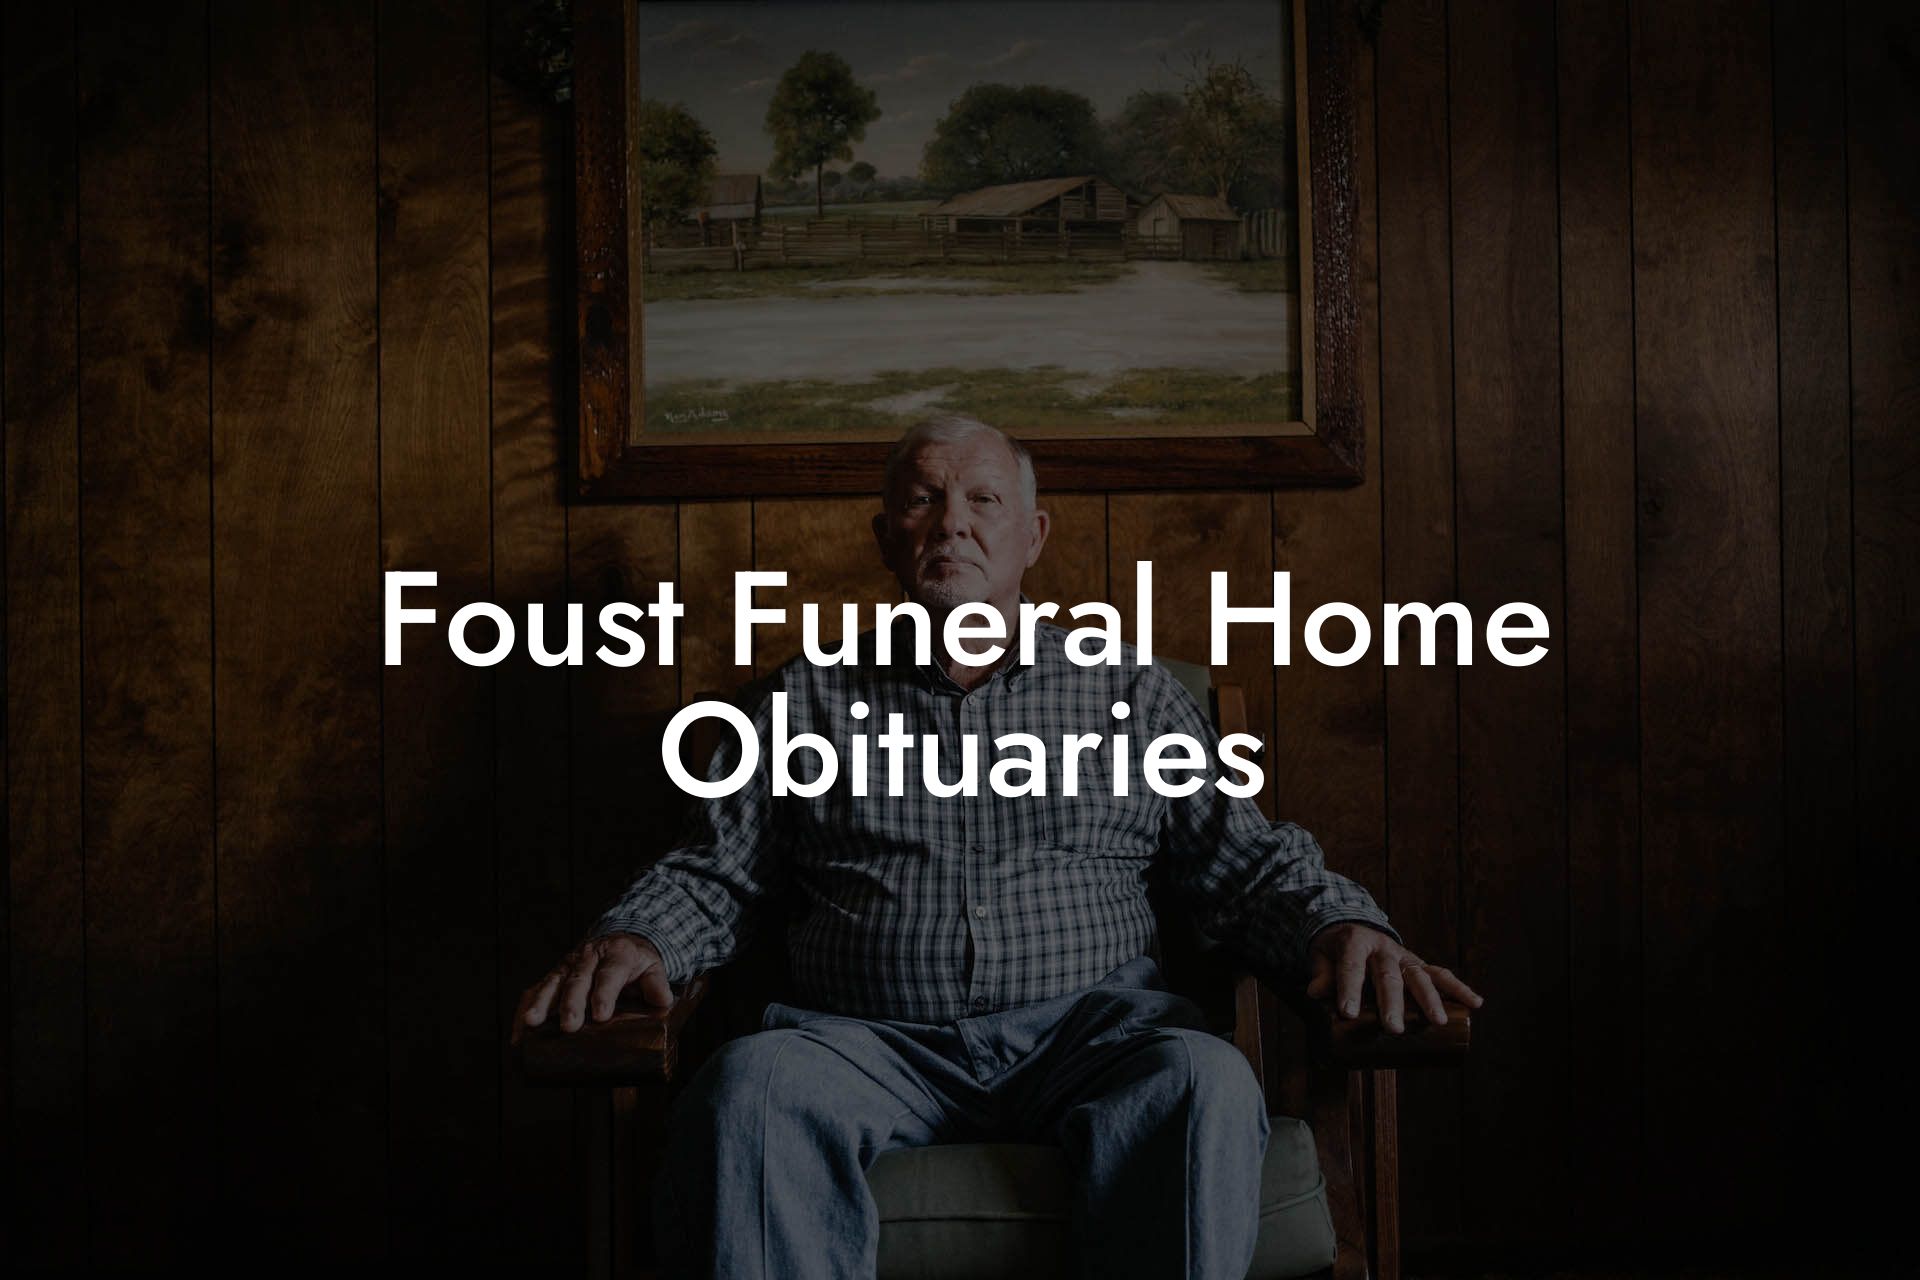 Foust Funeral Home Obituaries